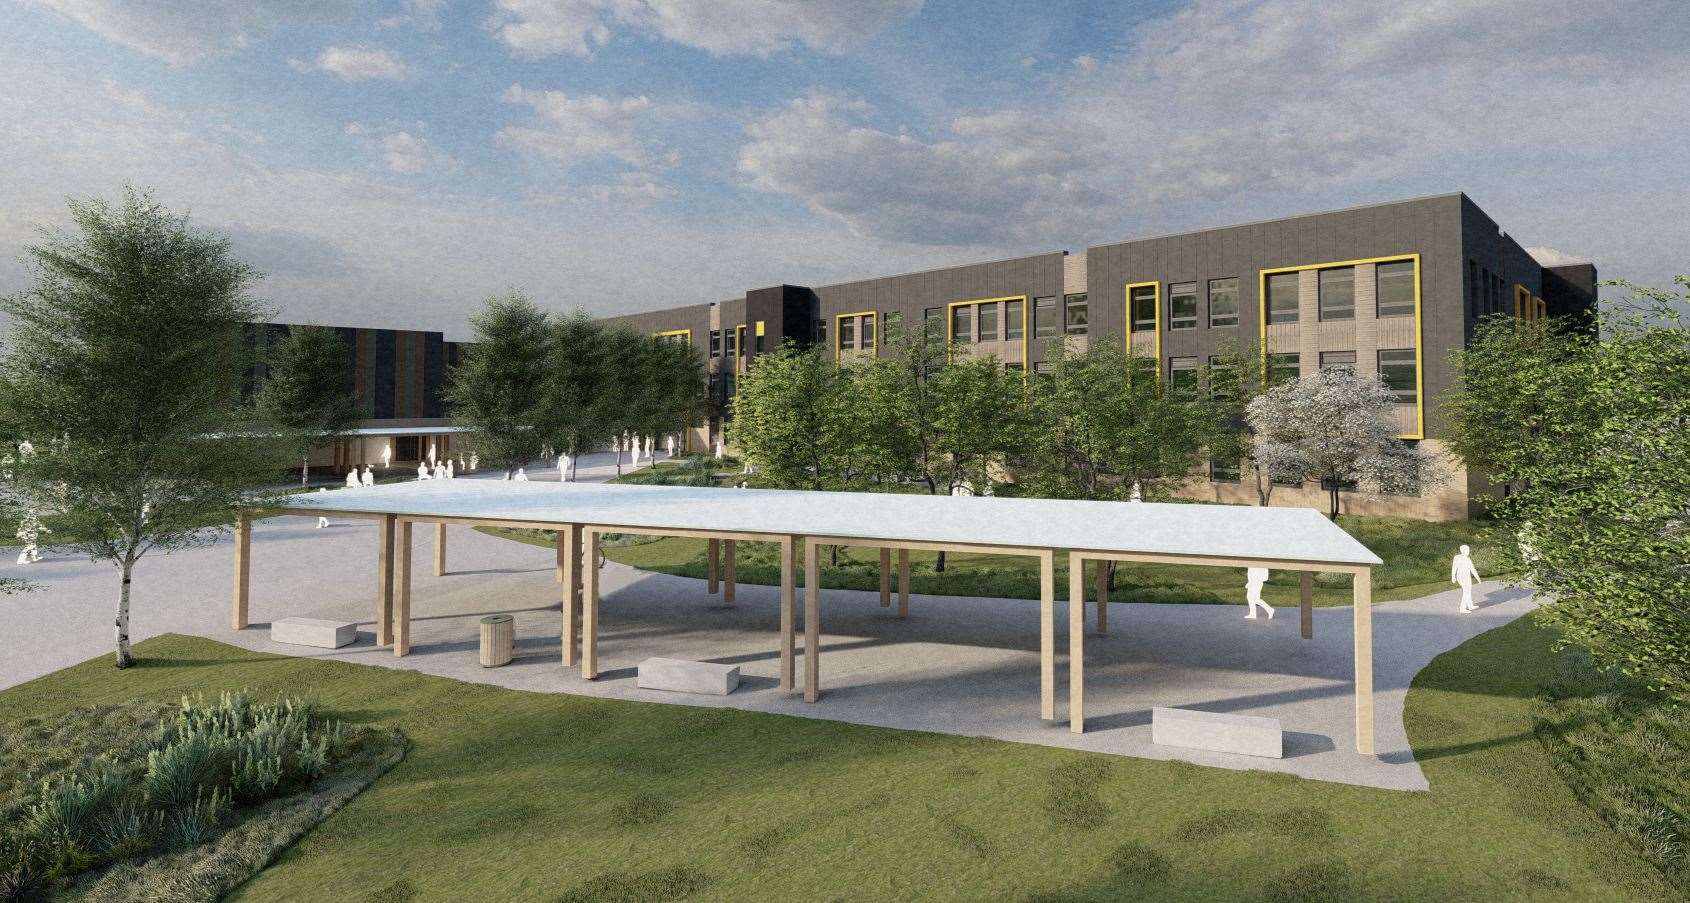 How the Chilmington Green Secondary School could look